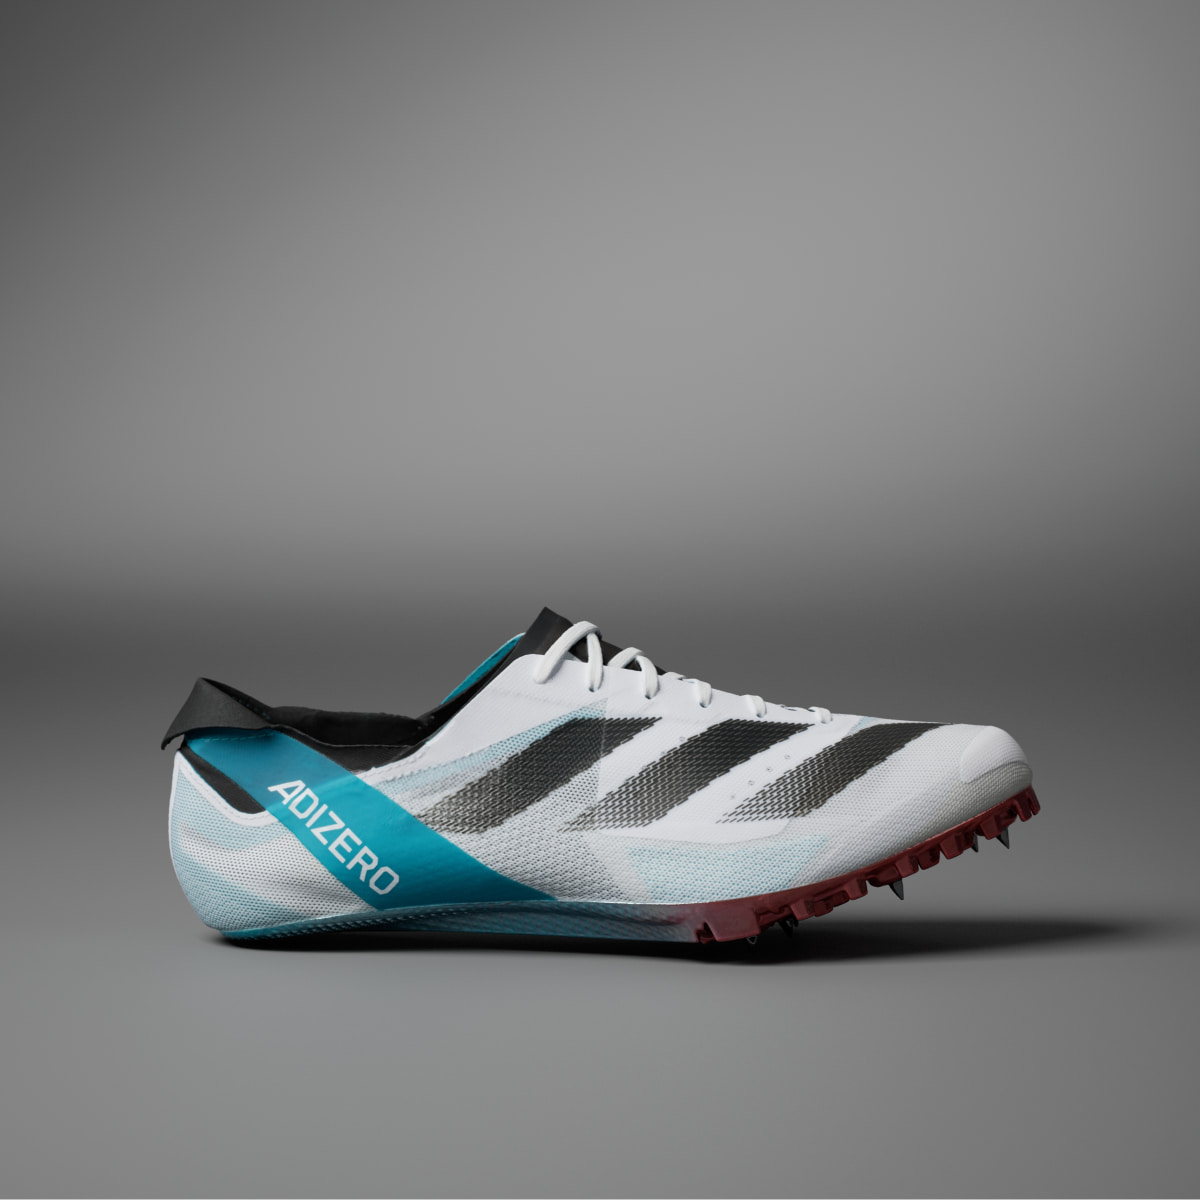 Adidas Adizero Finesse Track and Field Shoes. 4